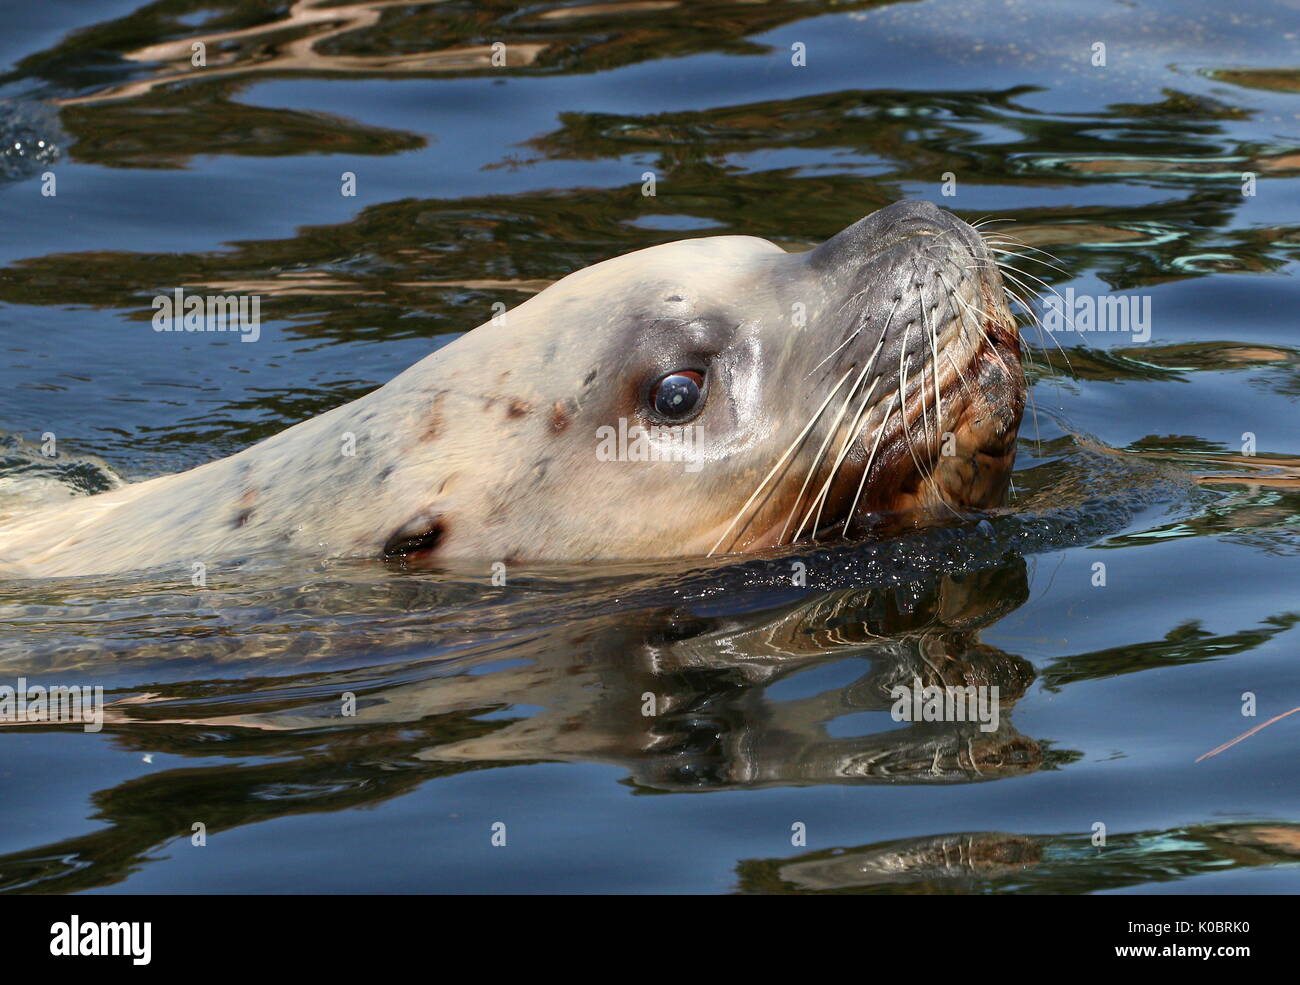 Male Steller's sea lion or Northern sea lion (Eumetopias jubatus), found in the northern Pacific Ocean. Stock Photo